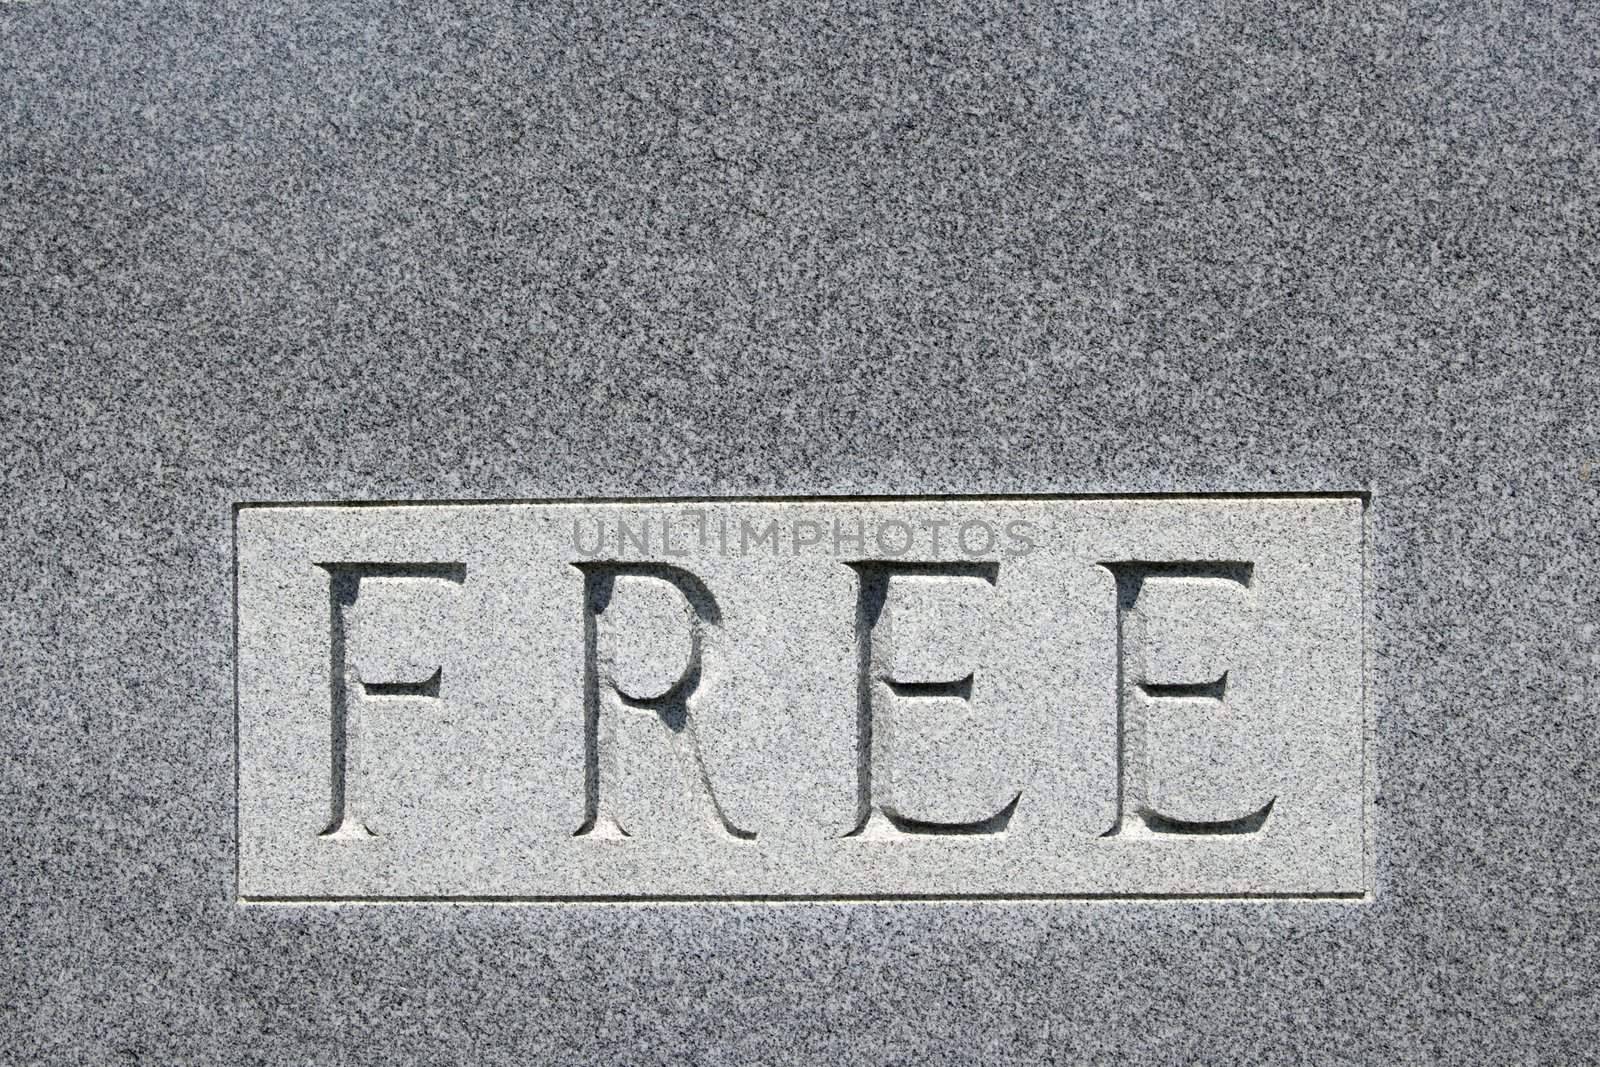 Gravestone with word "Free" on it.